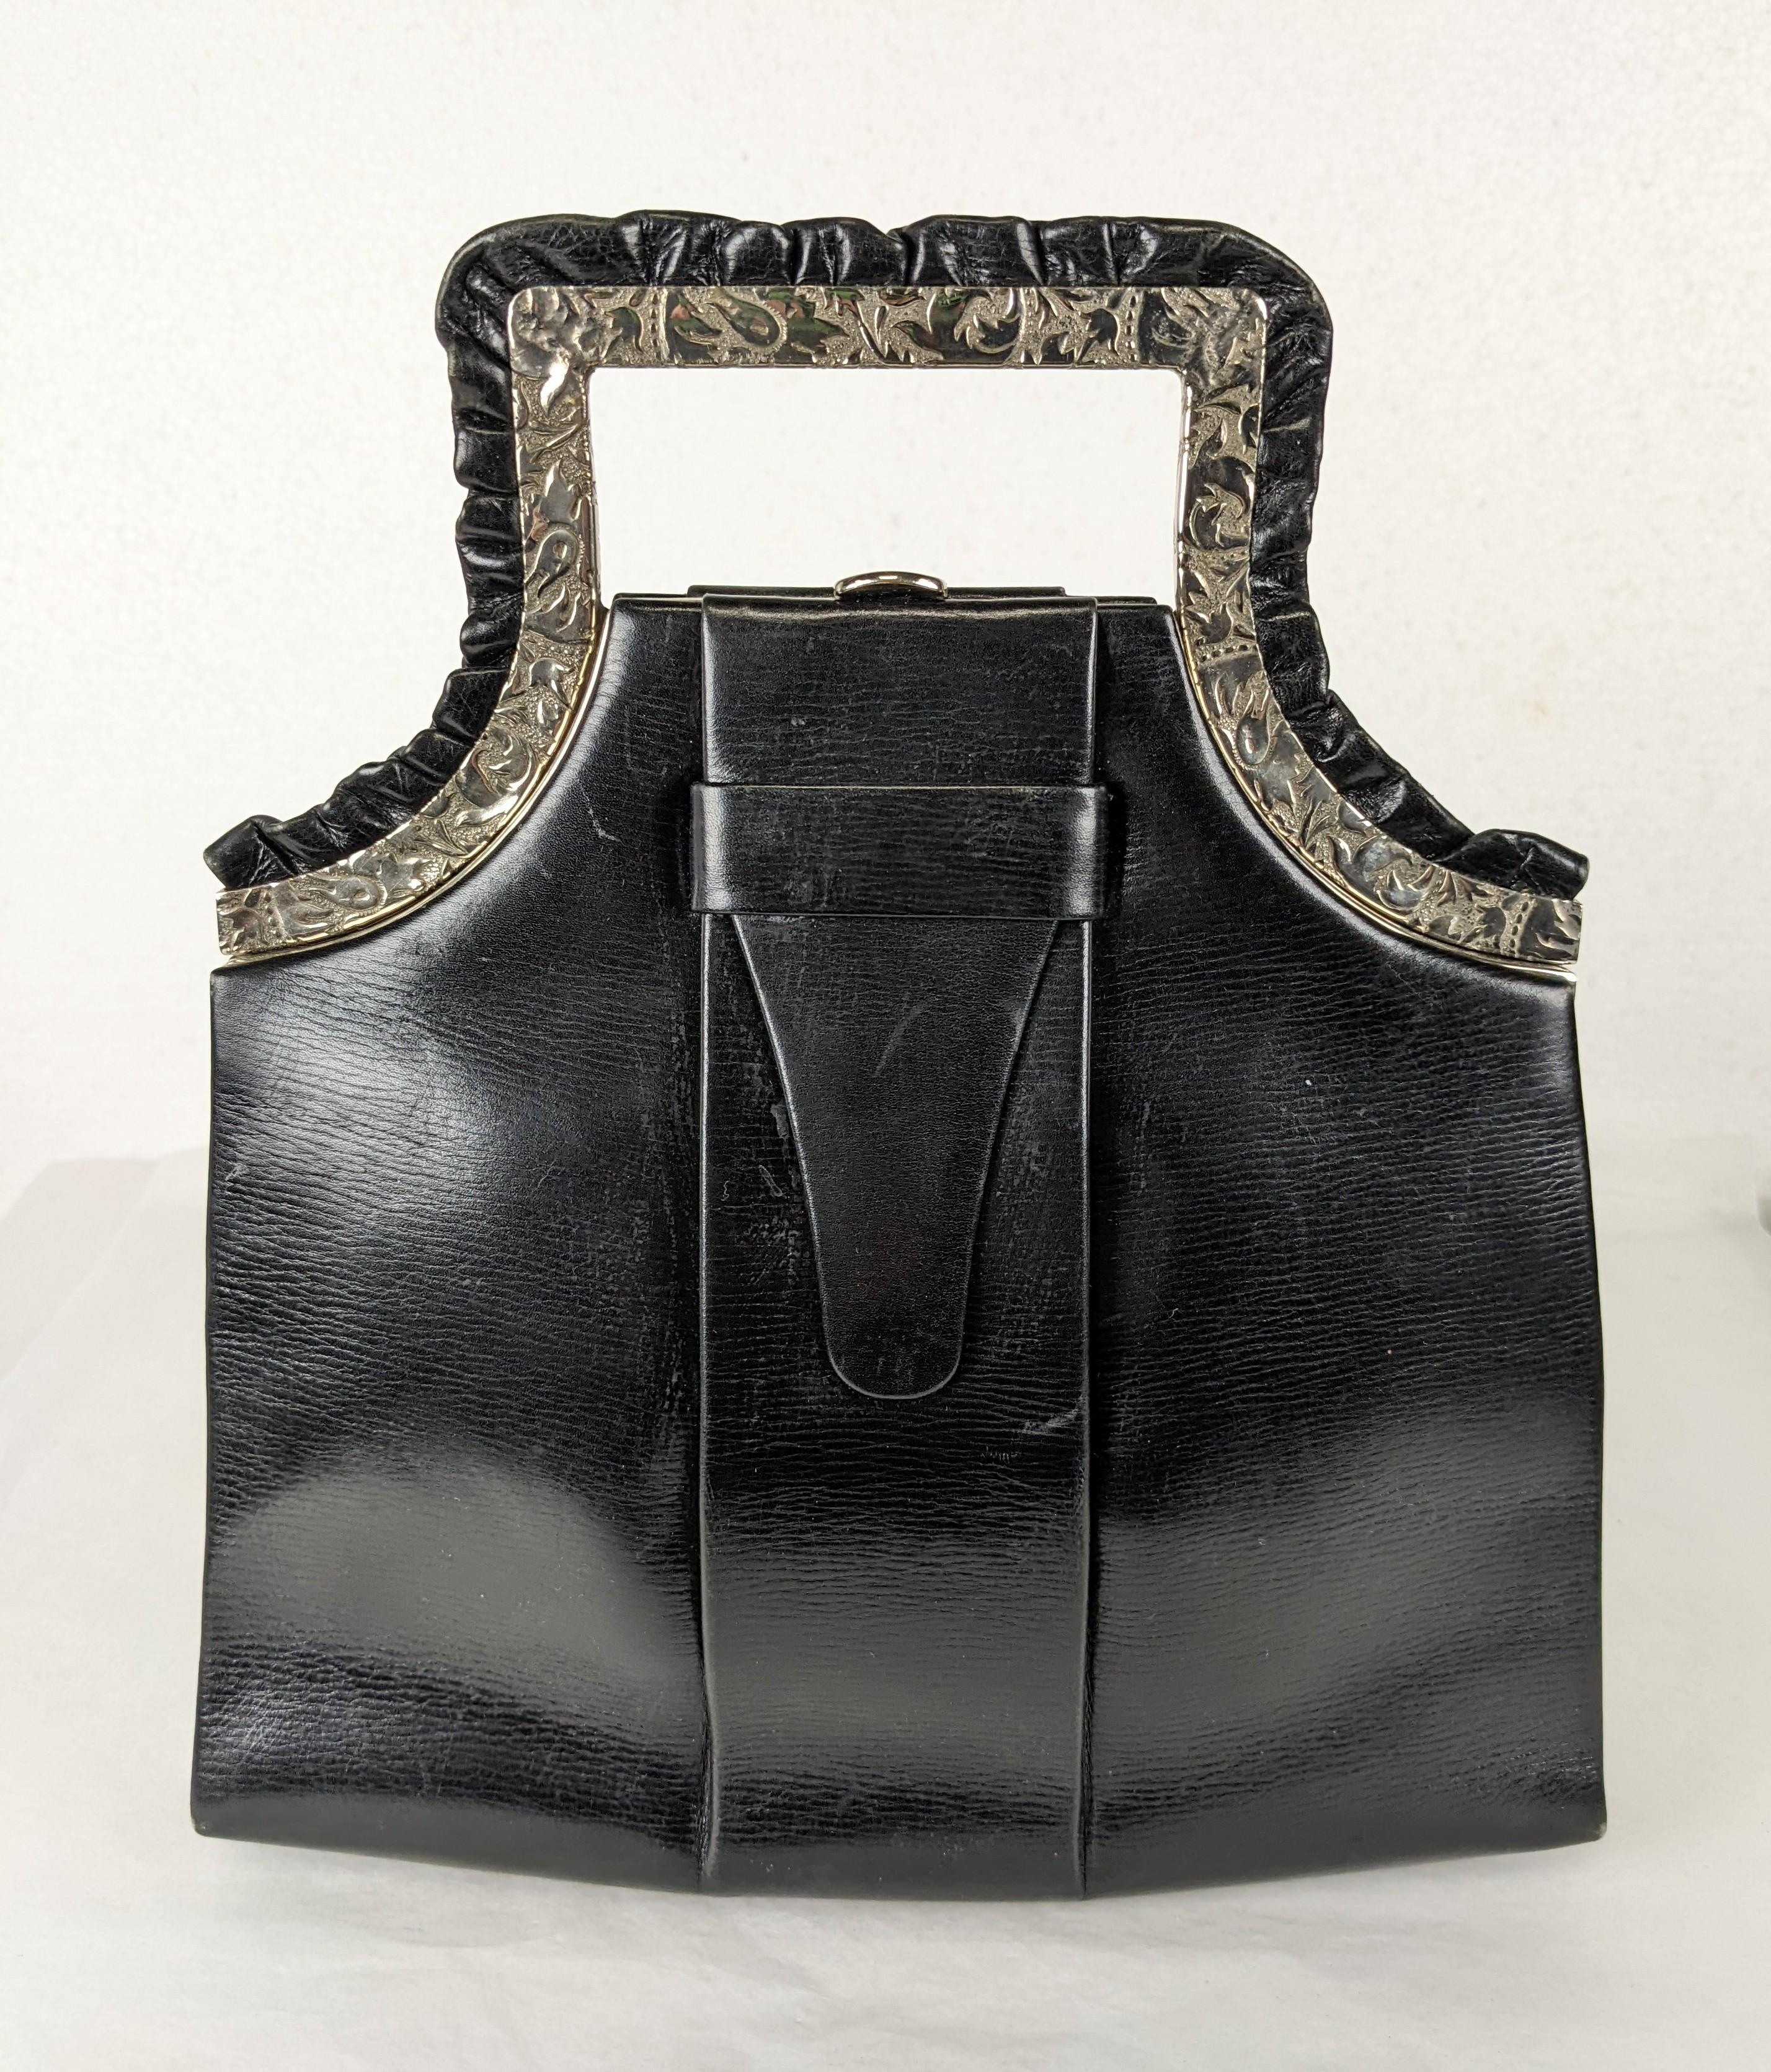 Amazing Art Deco Black Calf Top Handle Bag with elaborate chased chrome frame and leather ruffle accents. Incredible novelty design.  1930's USA. 